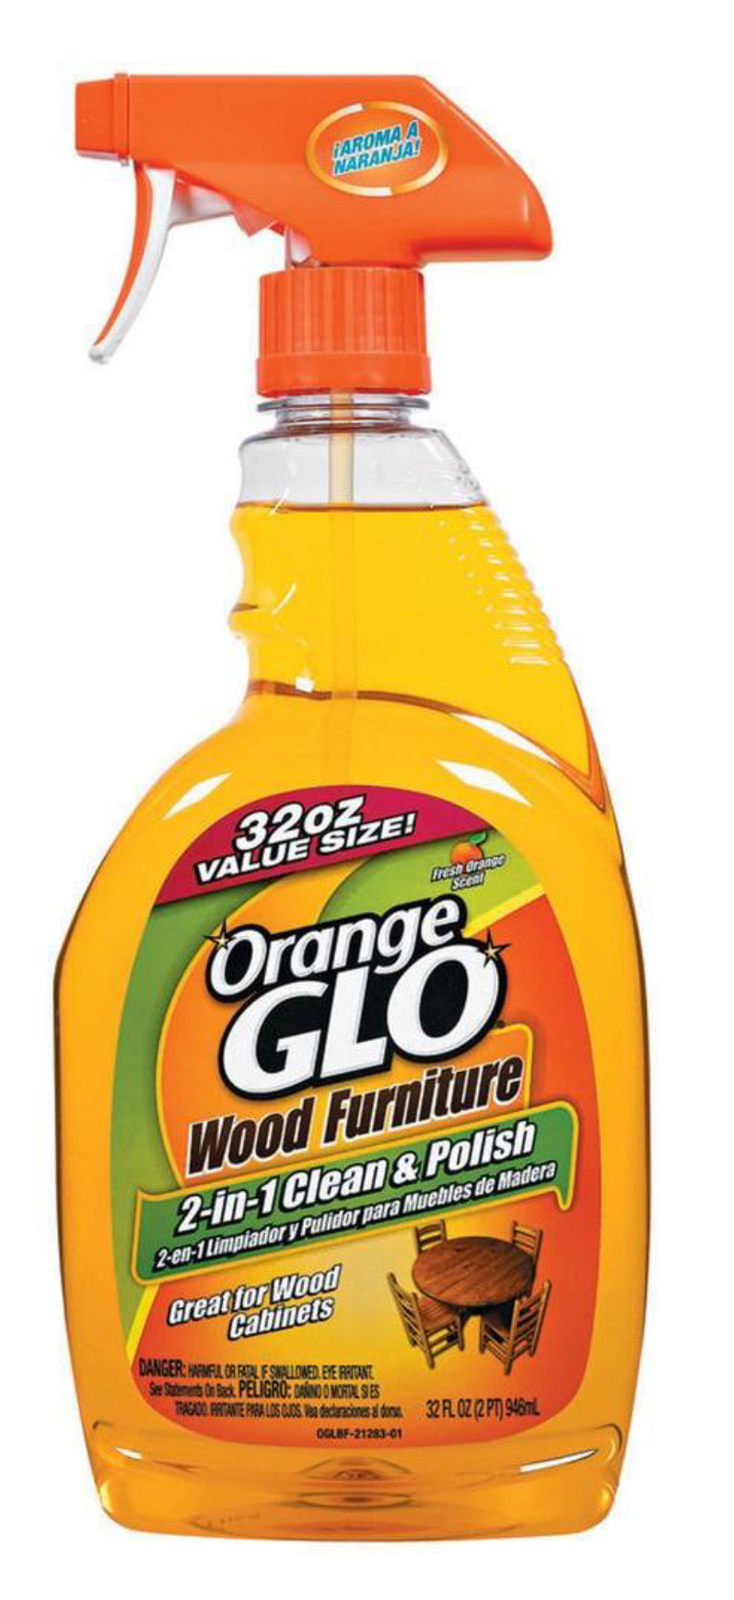 Primary image for Orange GLO Wood Furniture Cleaner and Polish Spray, 32 Fl. Oz.